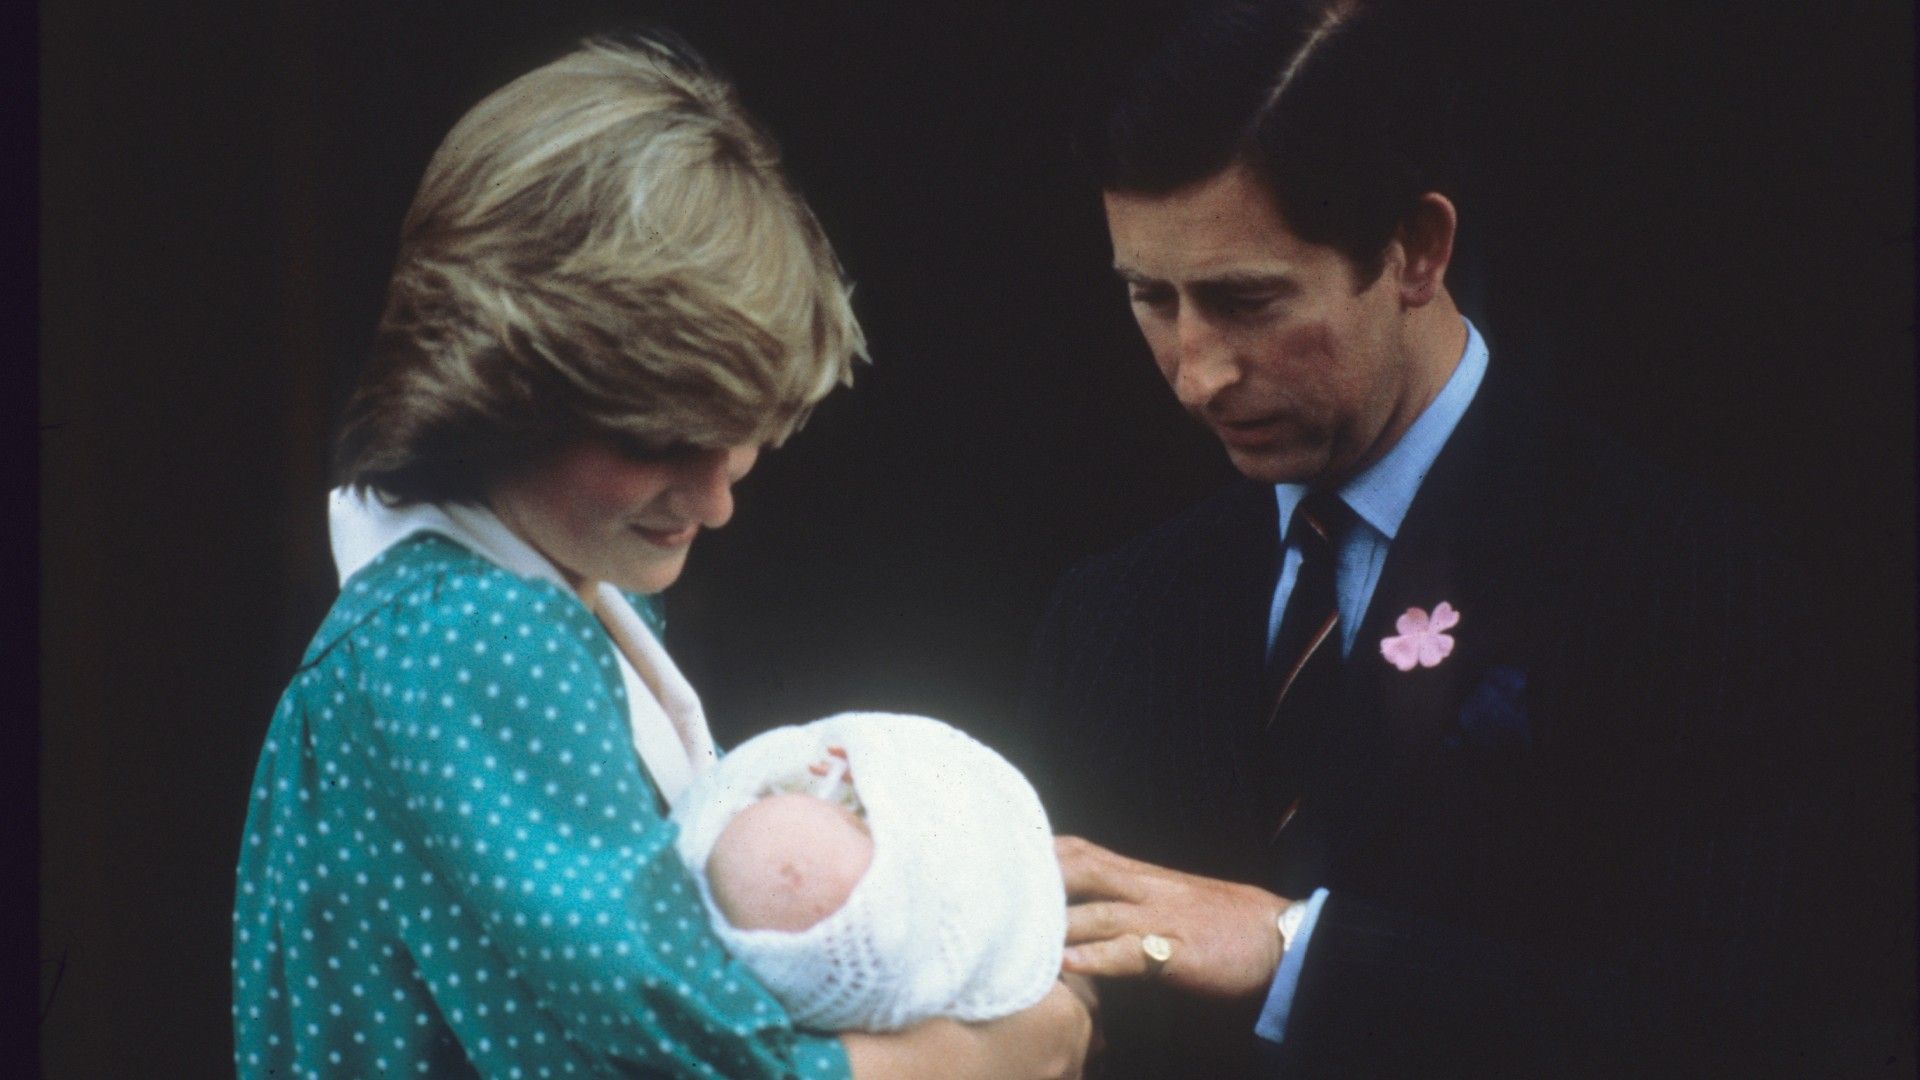 <p>                     Prior to Diana’s generation, the expected protocol for royal women was to give birth at home – Queen Elizabeth II for example, had all of her children in either Buckingham Palace or Clarence House.                   </p>                                      <p>                     Diana, however, was the first royal to give birth in hospital, when she and Charles welcomed Prince William on 21st June 1982 at St. Mary’s Hospital in London. She wasn’t however, the first royal to ever give birth in a hospital – Princess Anne actually takes that crown, having given birth to Peter Phillips at the same hospital in November 1977.                   </p>